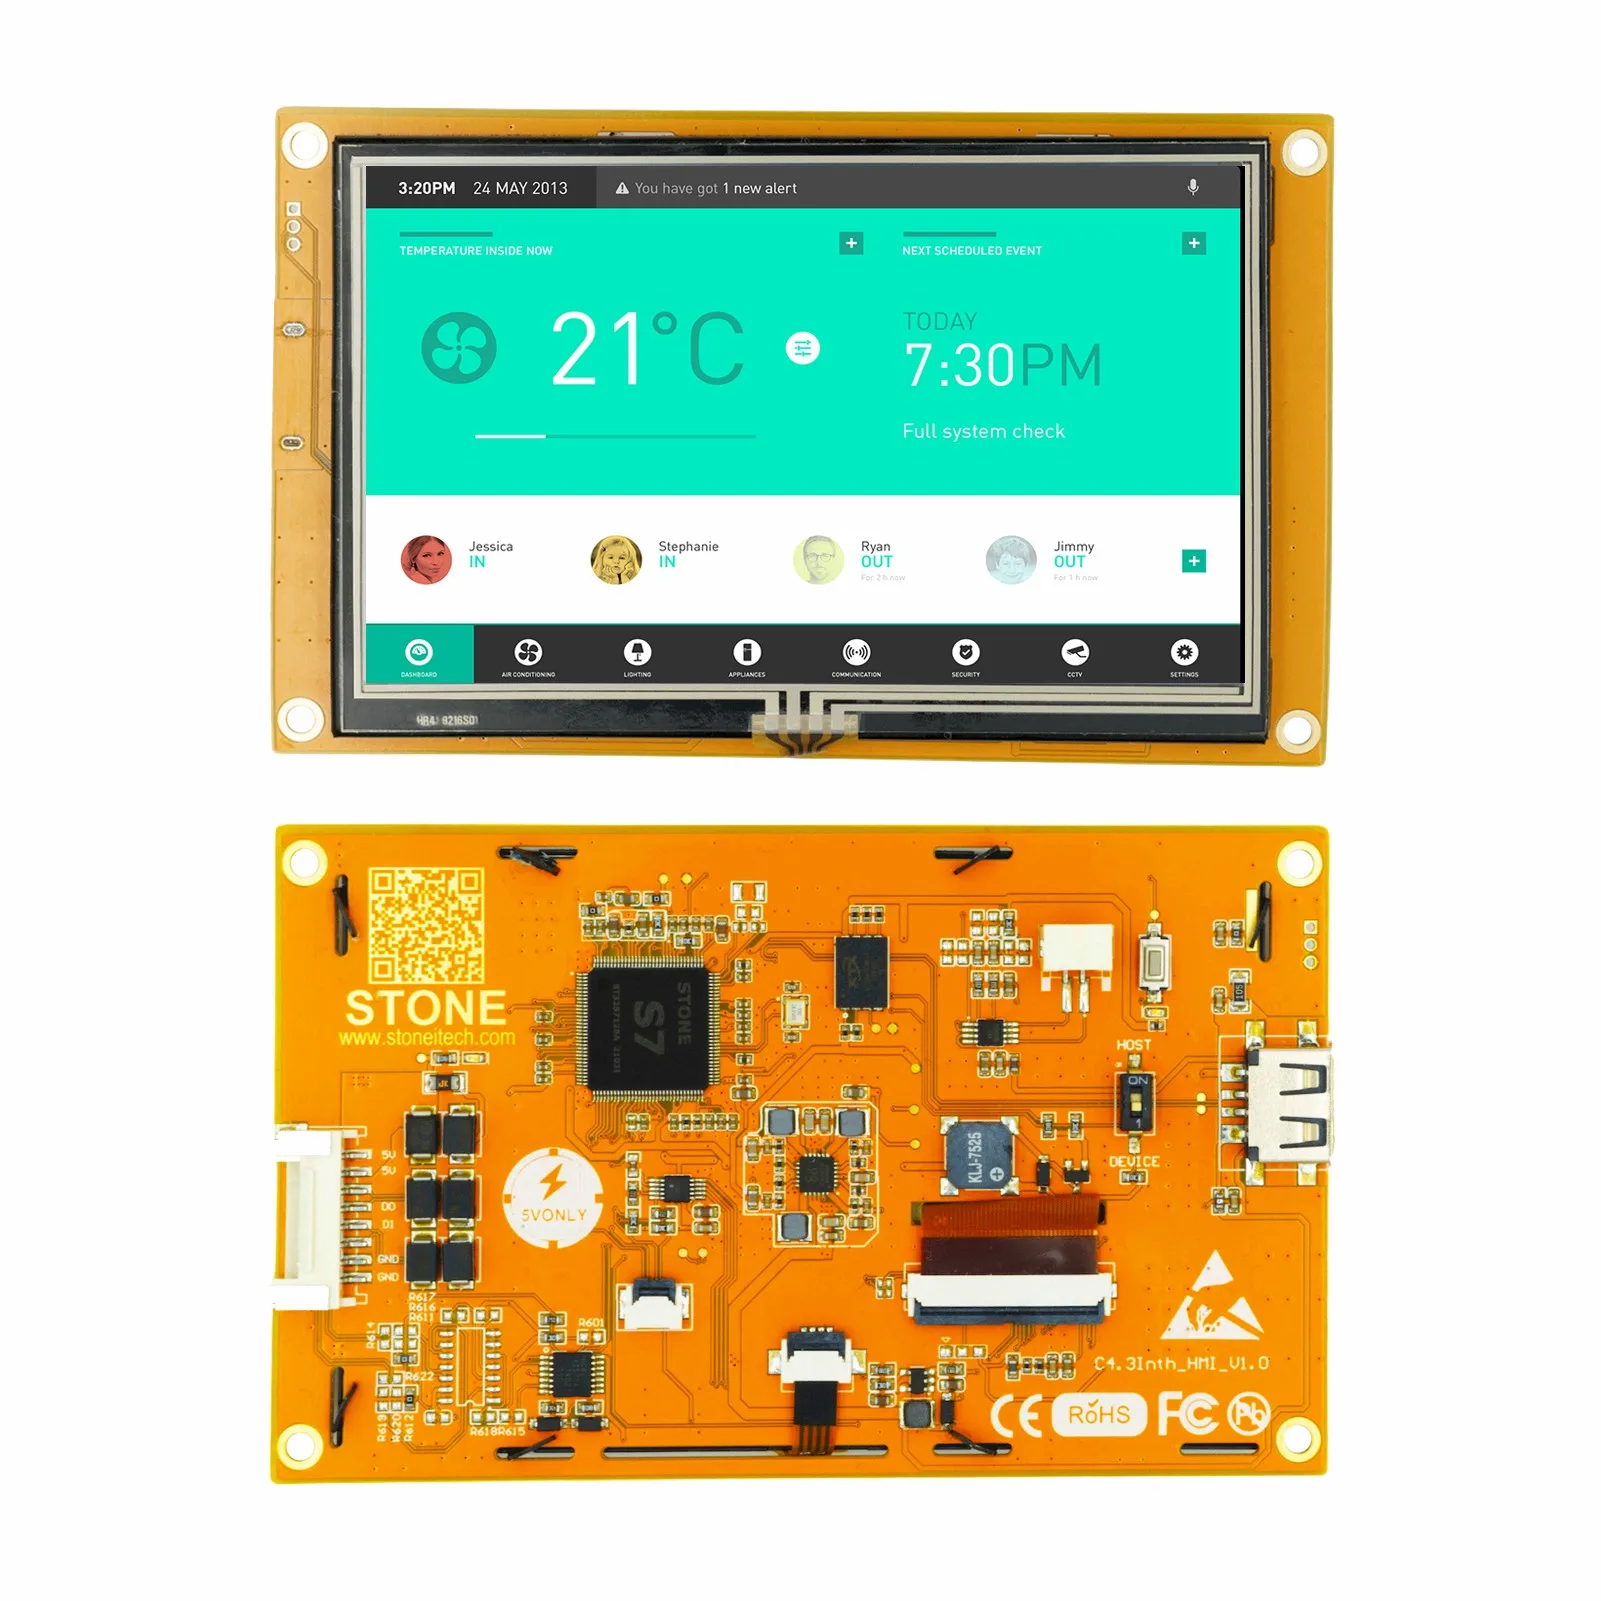 Stone 4.3 inch intelligent TFT LCD Module with UART PORT controlled by ANY MCU via Simple Powerful Command Set